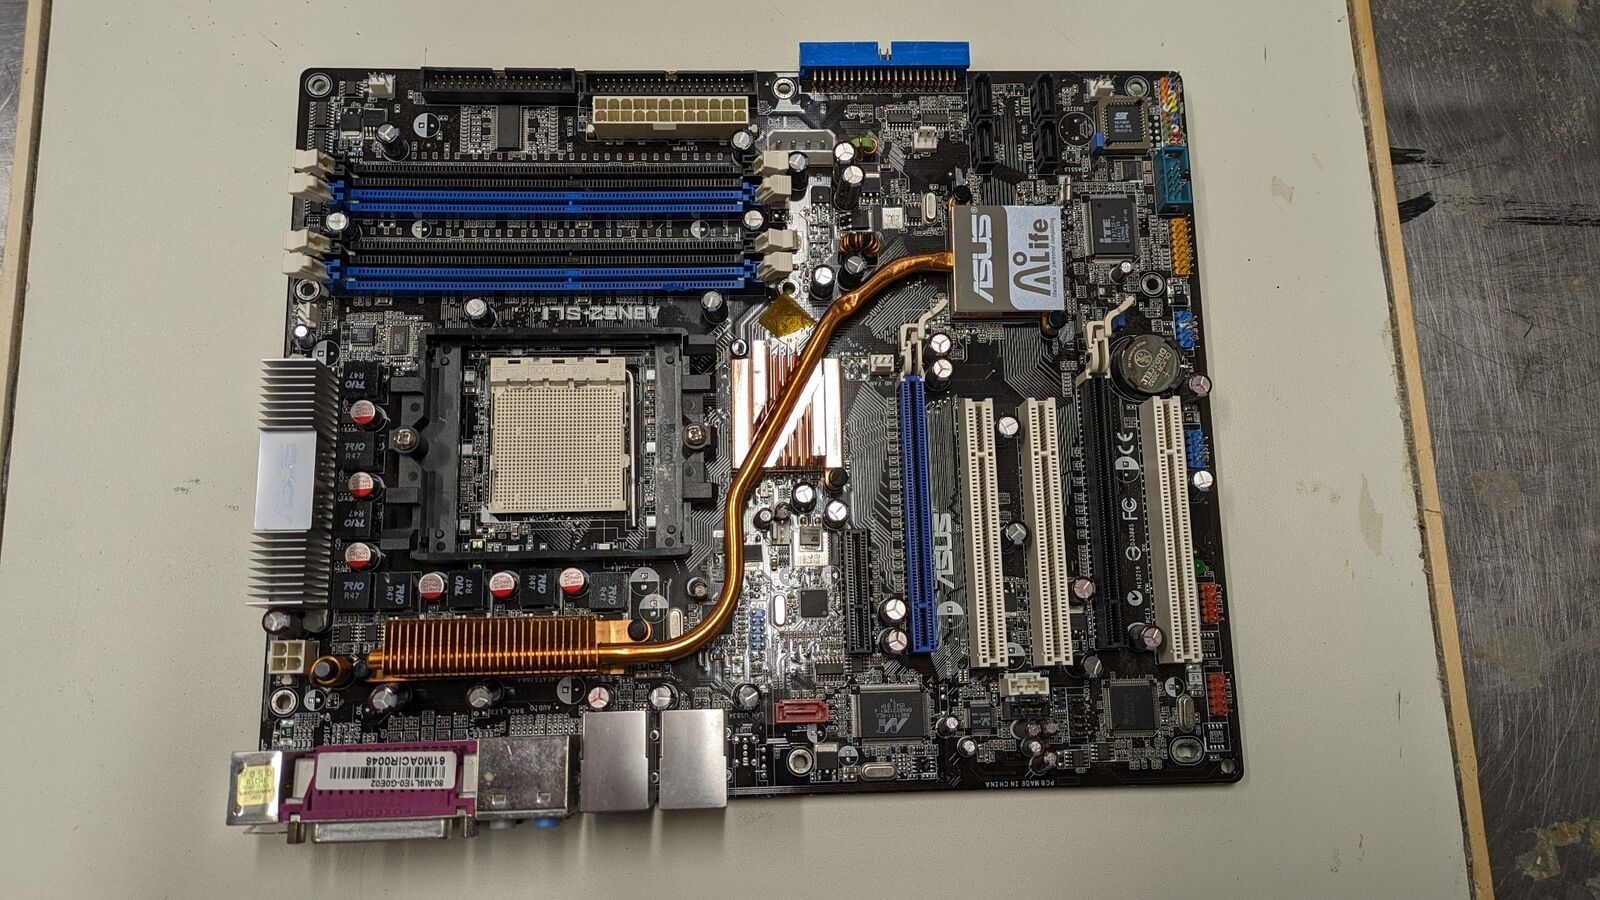 ASUS A8N32-SLI Deluxe AMD 939 socket motherboard for parts